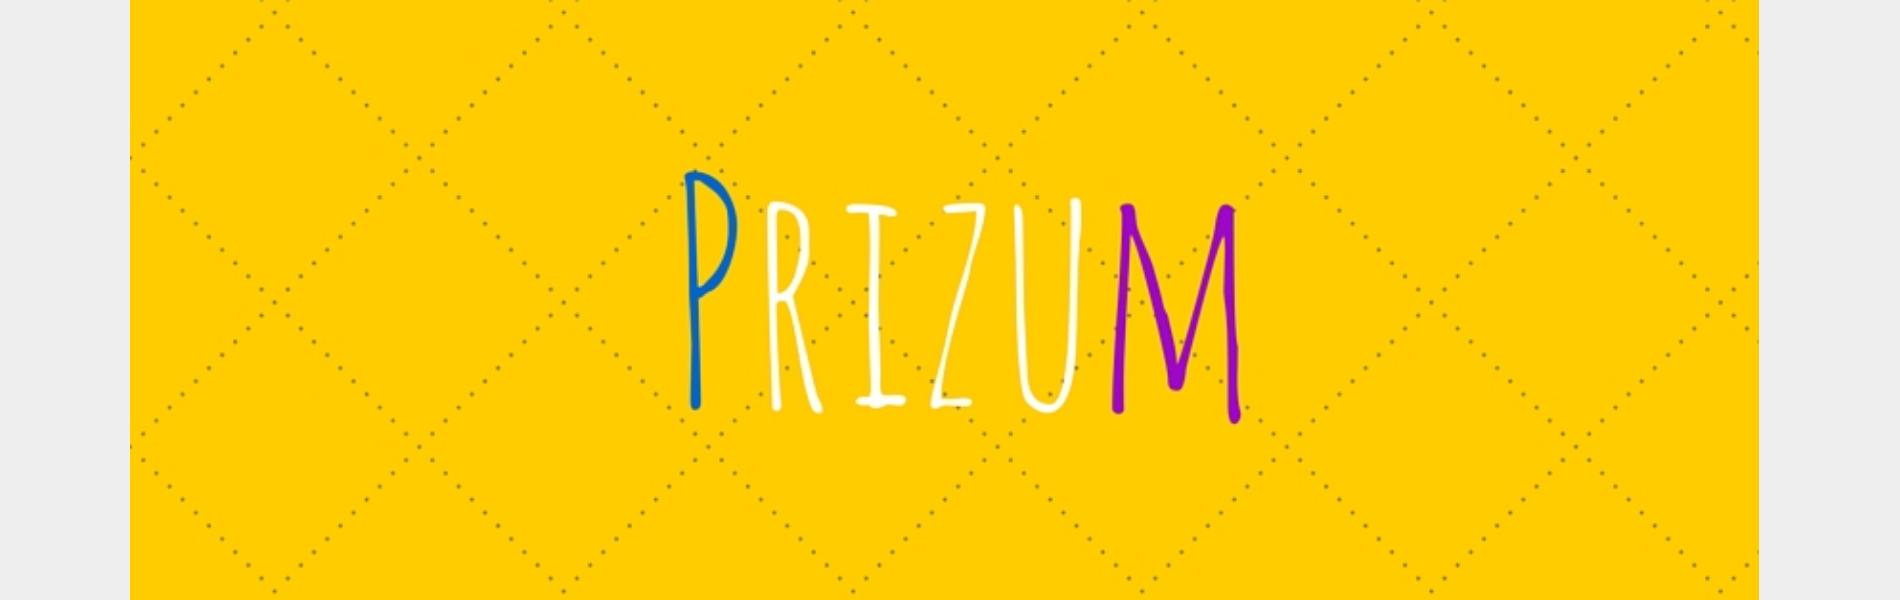 Prizum - Specially Yours